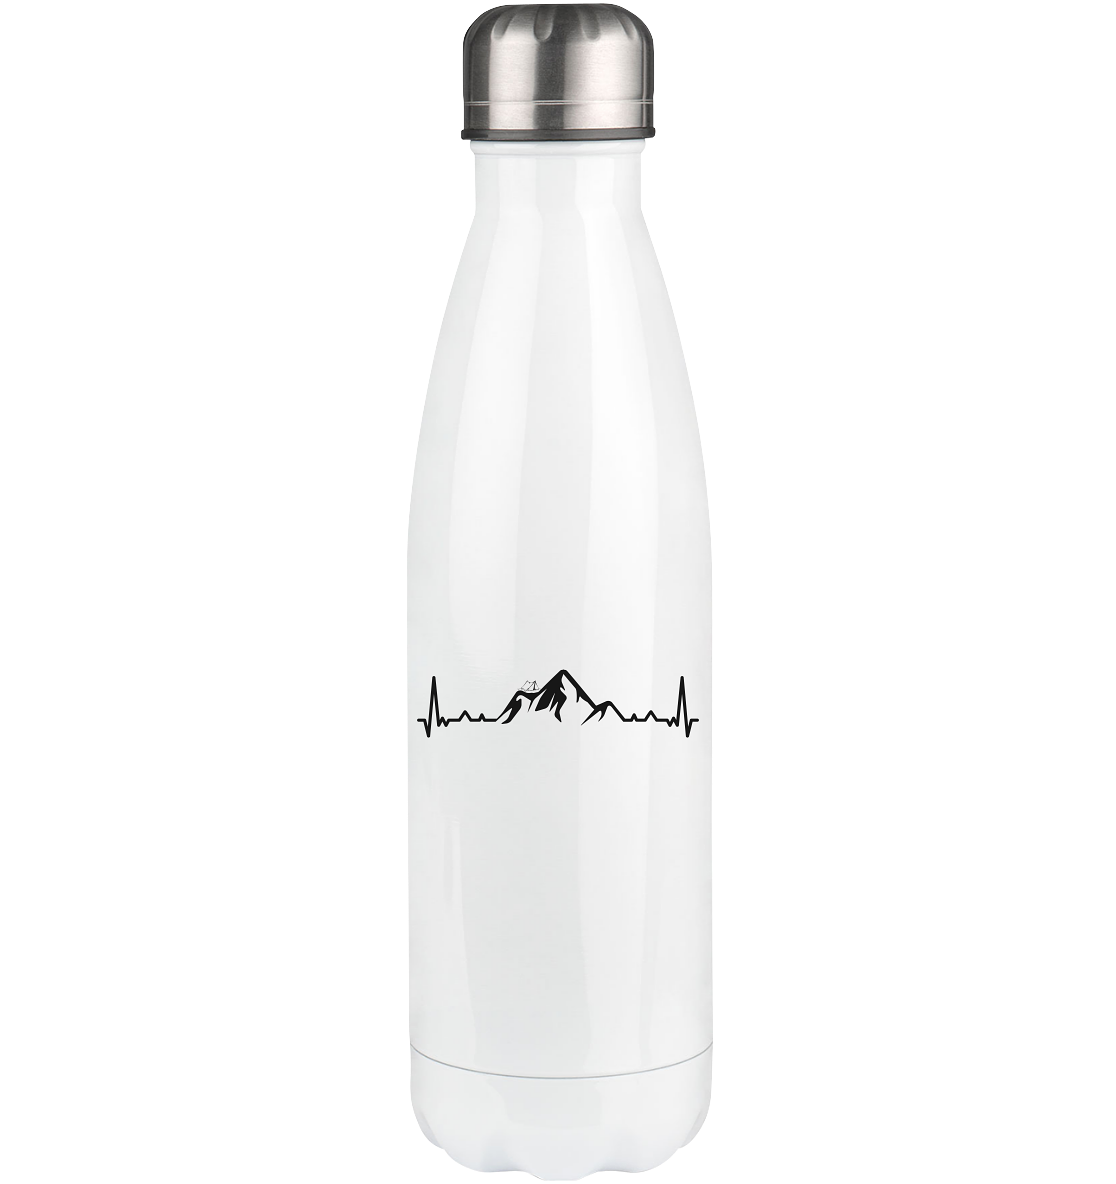 Heartbeat Mountain and Camping - Edelstahl Thermosflasche camping 500ml